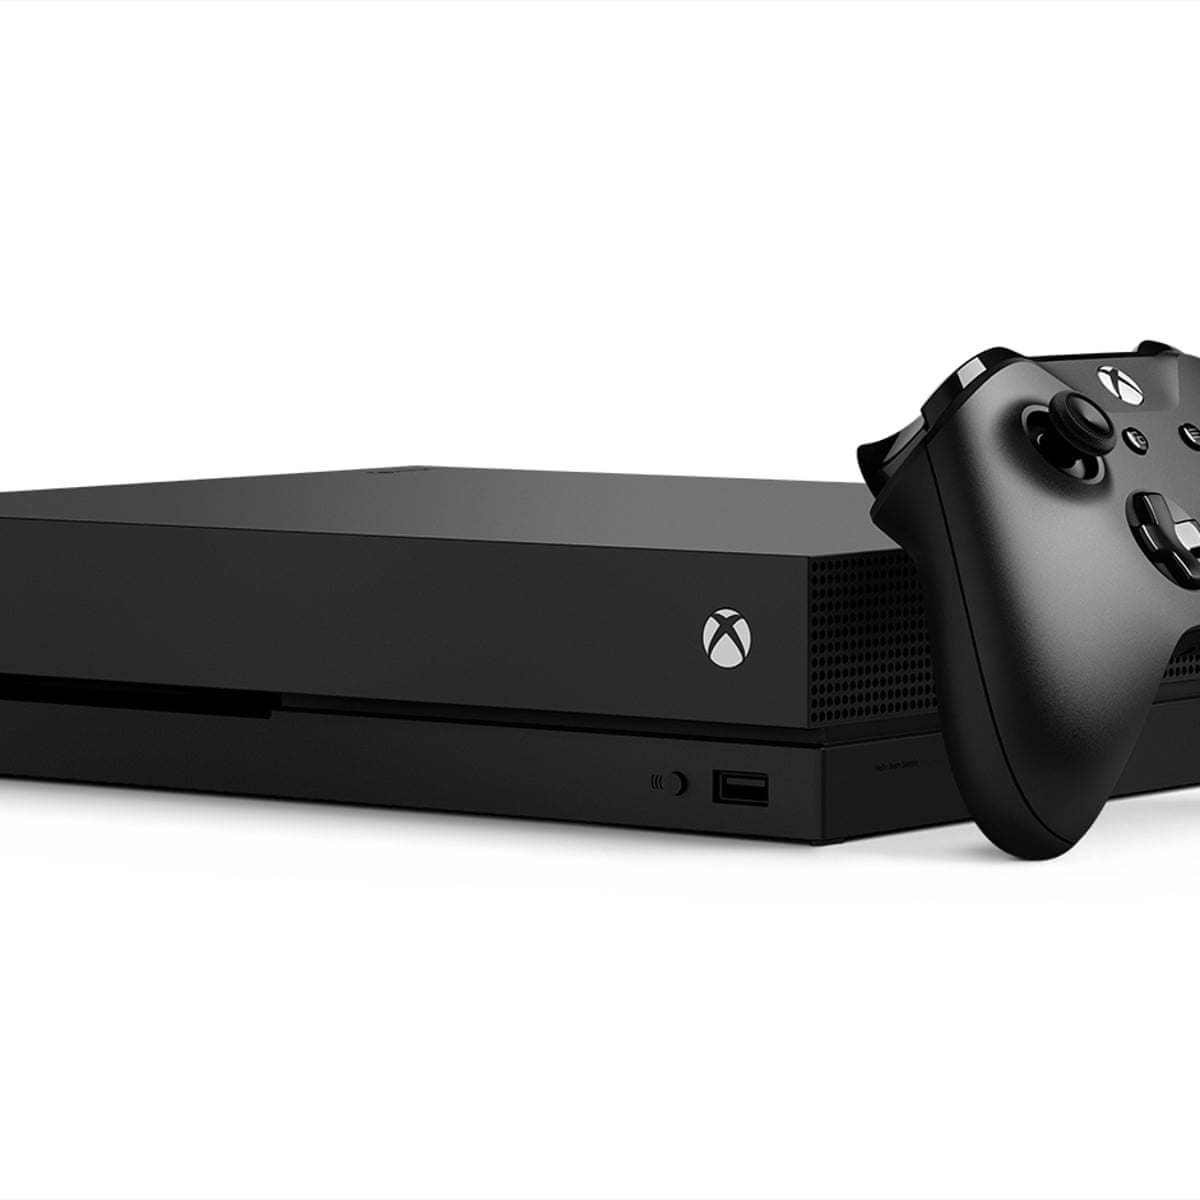 Xbox One X review: a perfect pitch to a demanding demographic